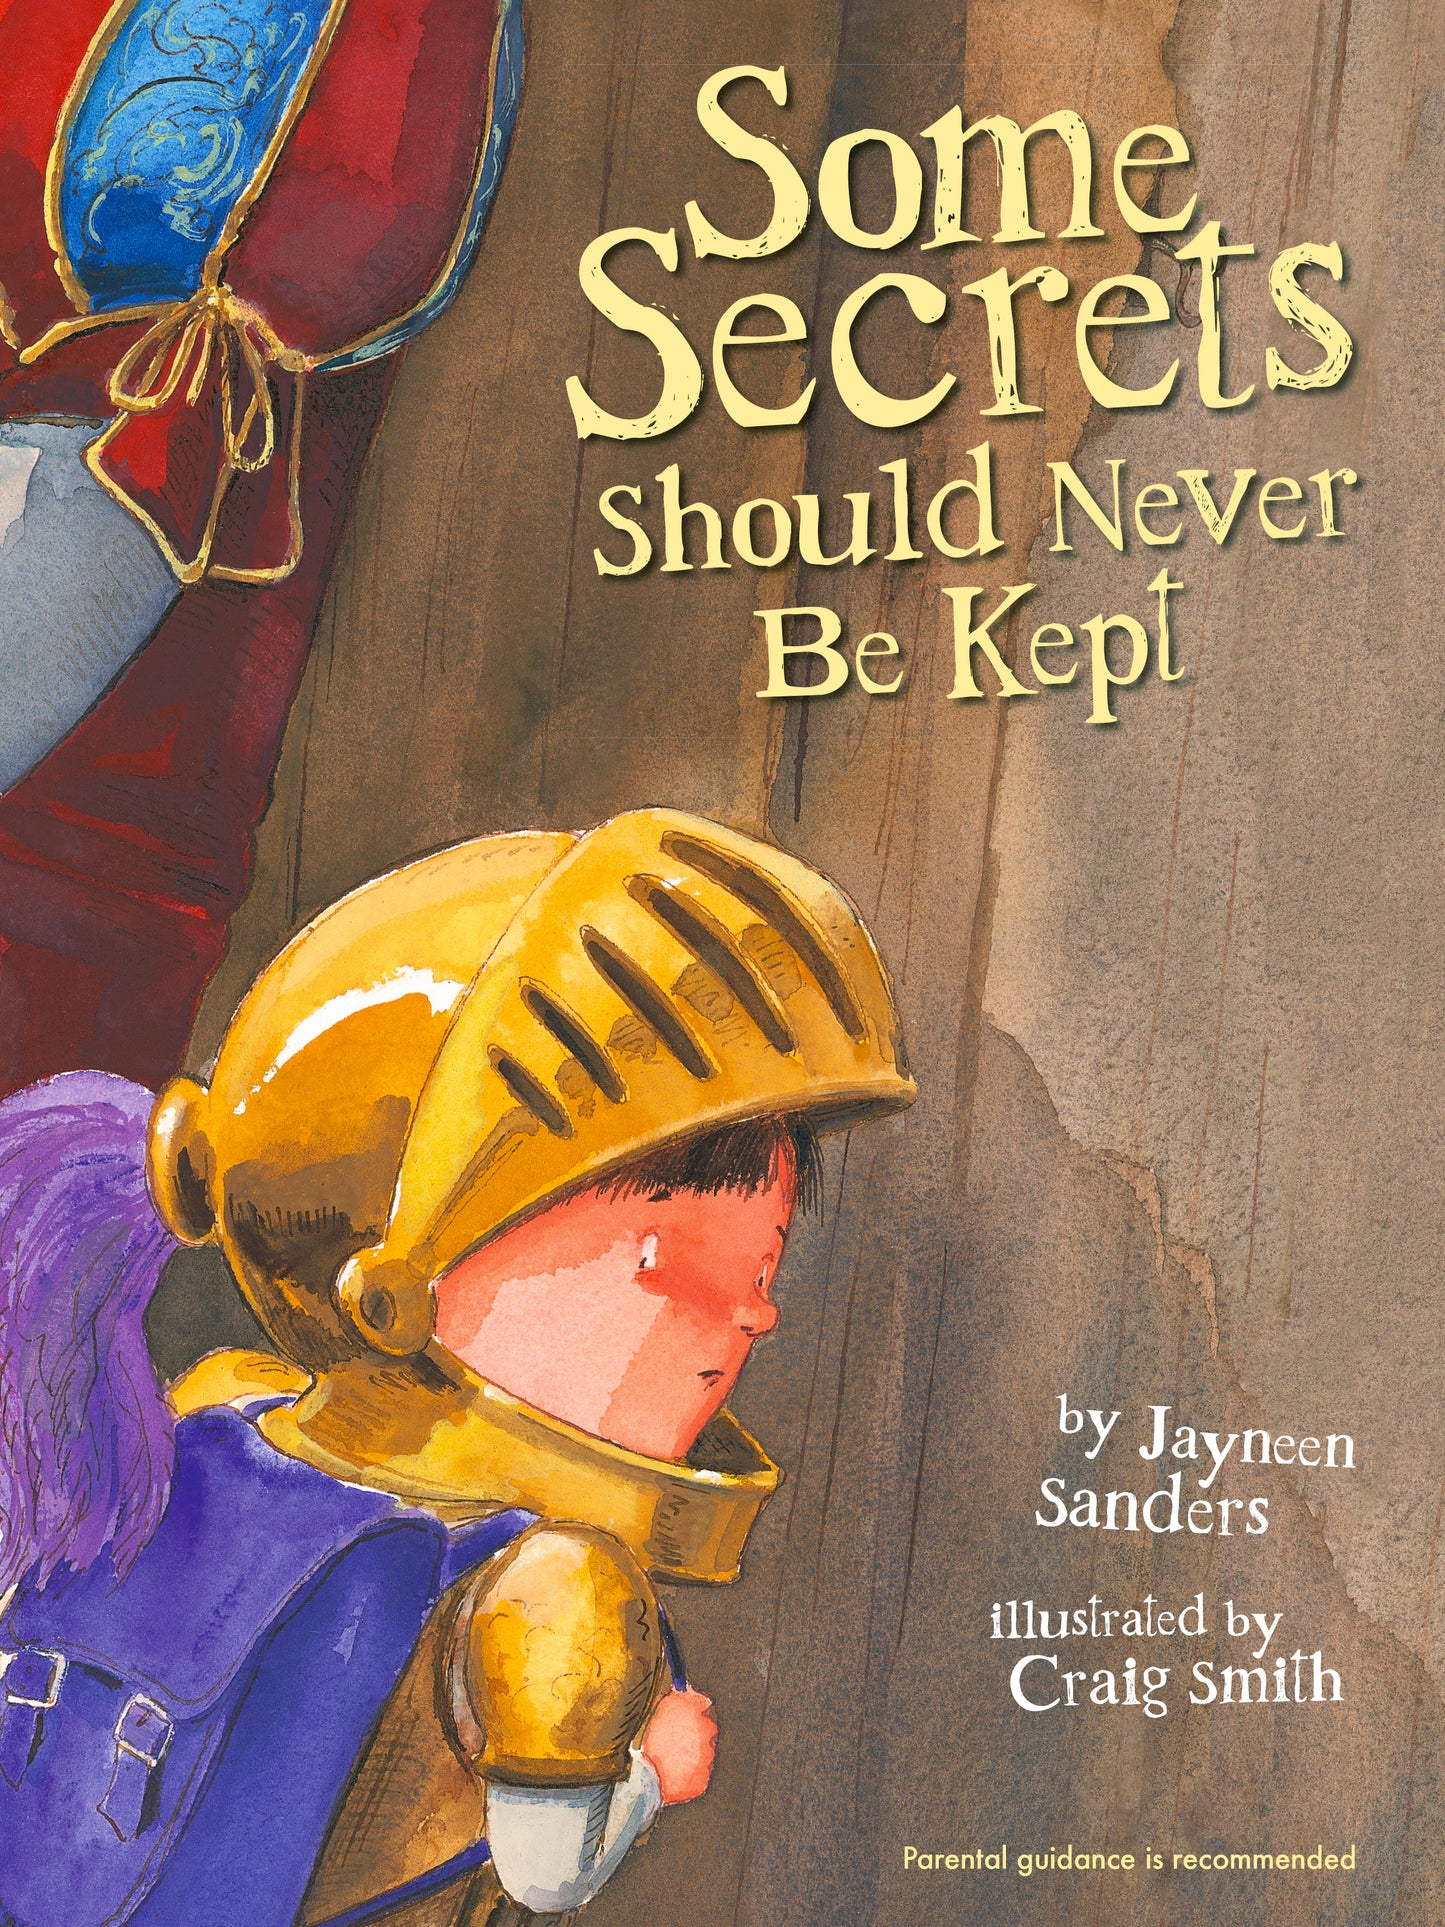 The cover of the book ‘Some Secrets Should Never Be Kept’ by Jayneen Sanders.